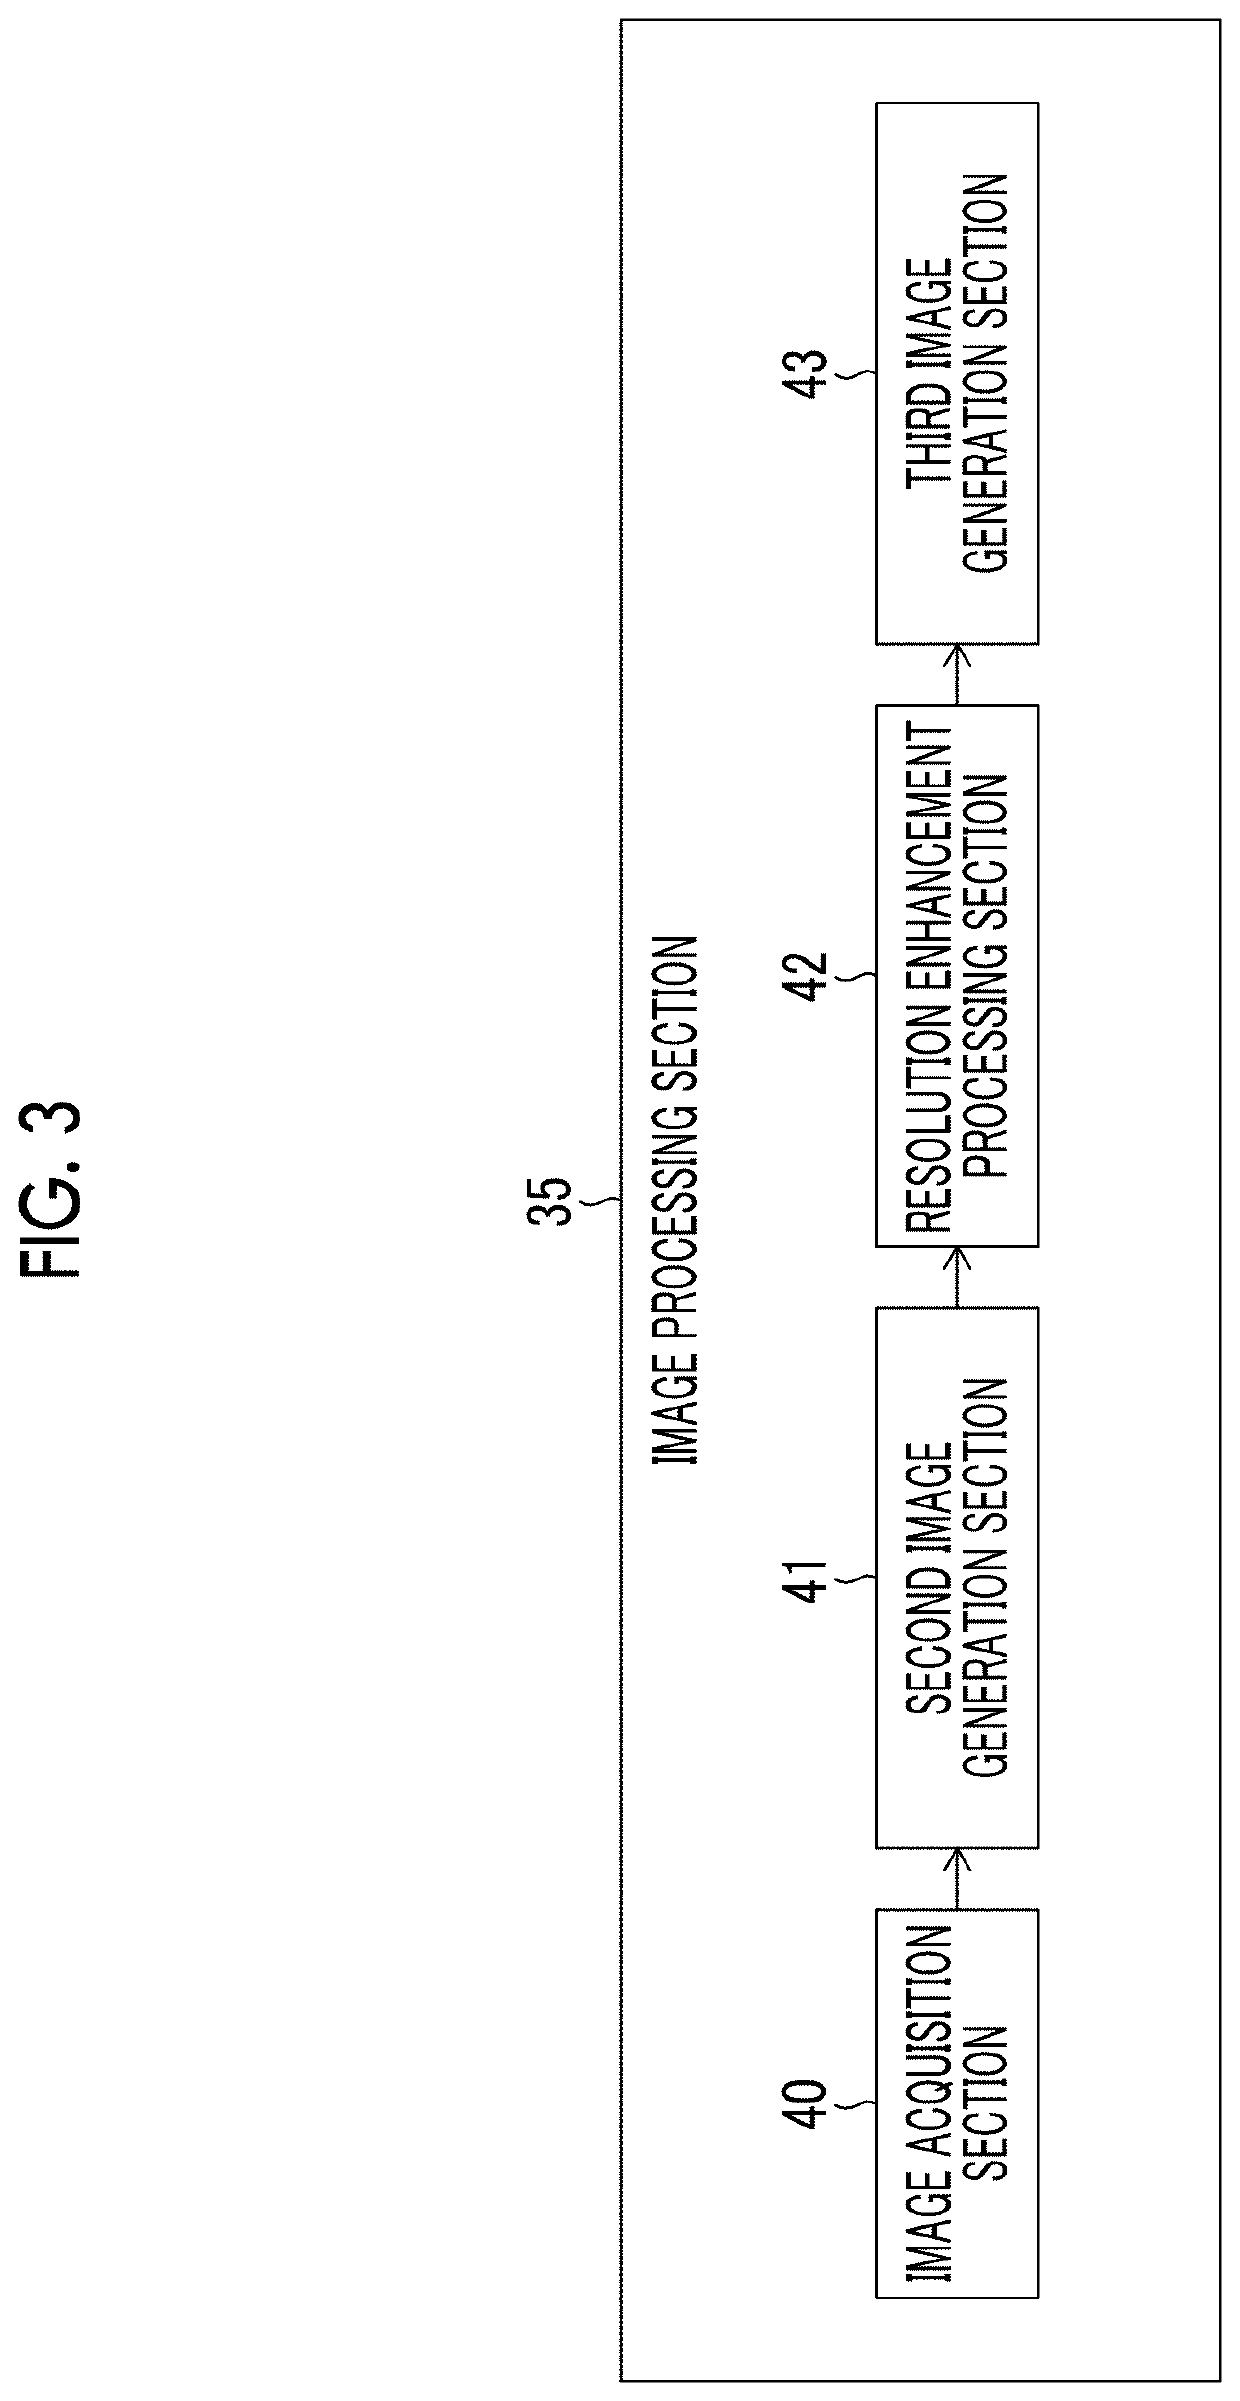 Image processing device, image processing method, and program processing image which is developed as a panorama